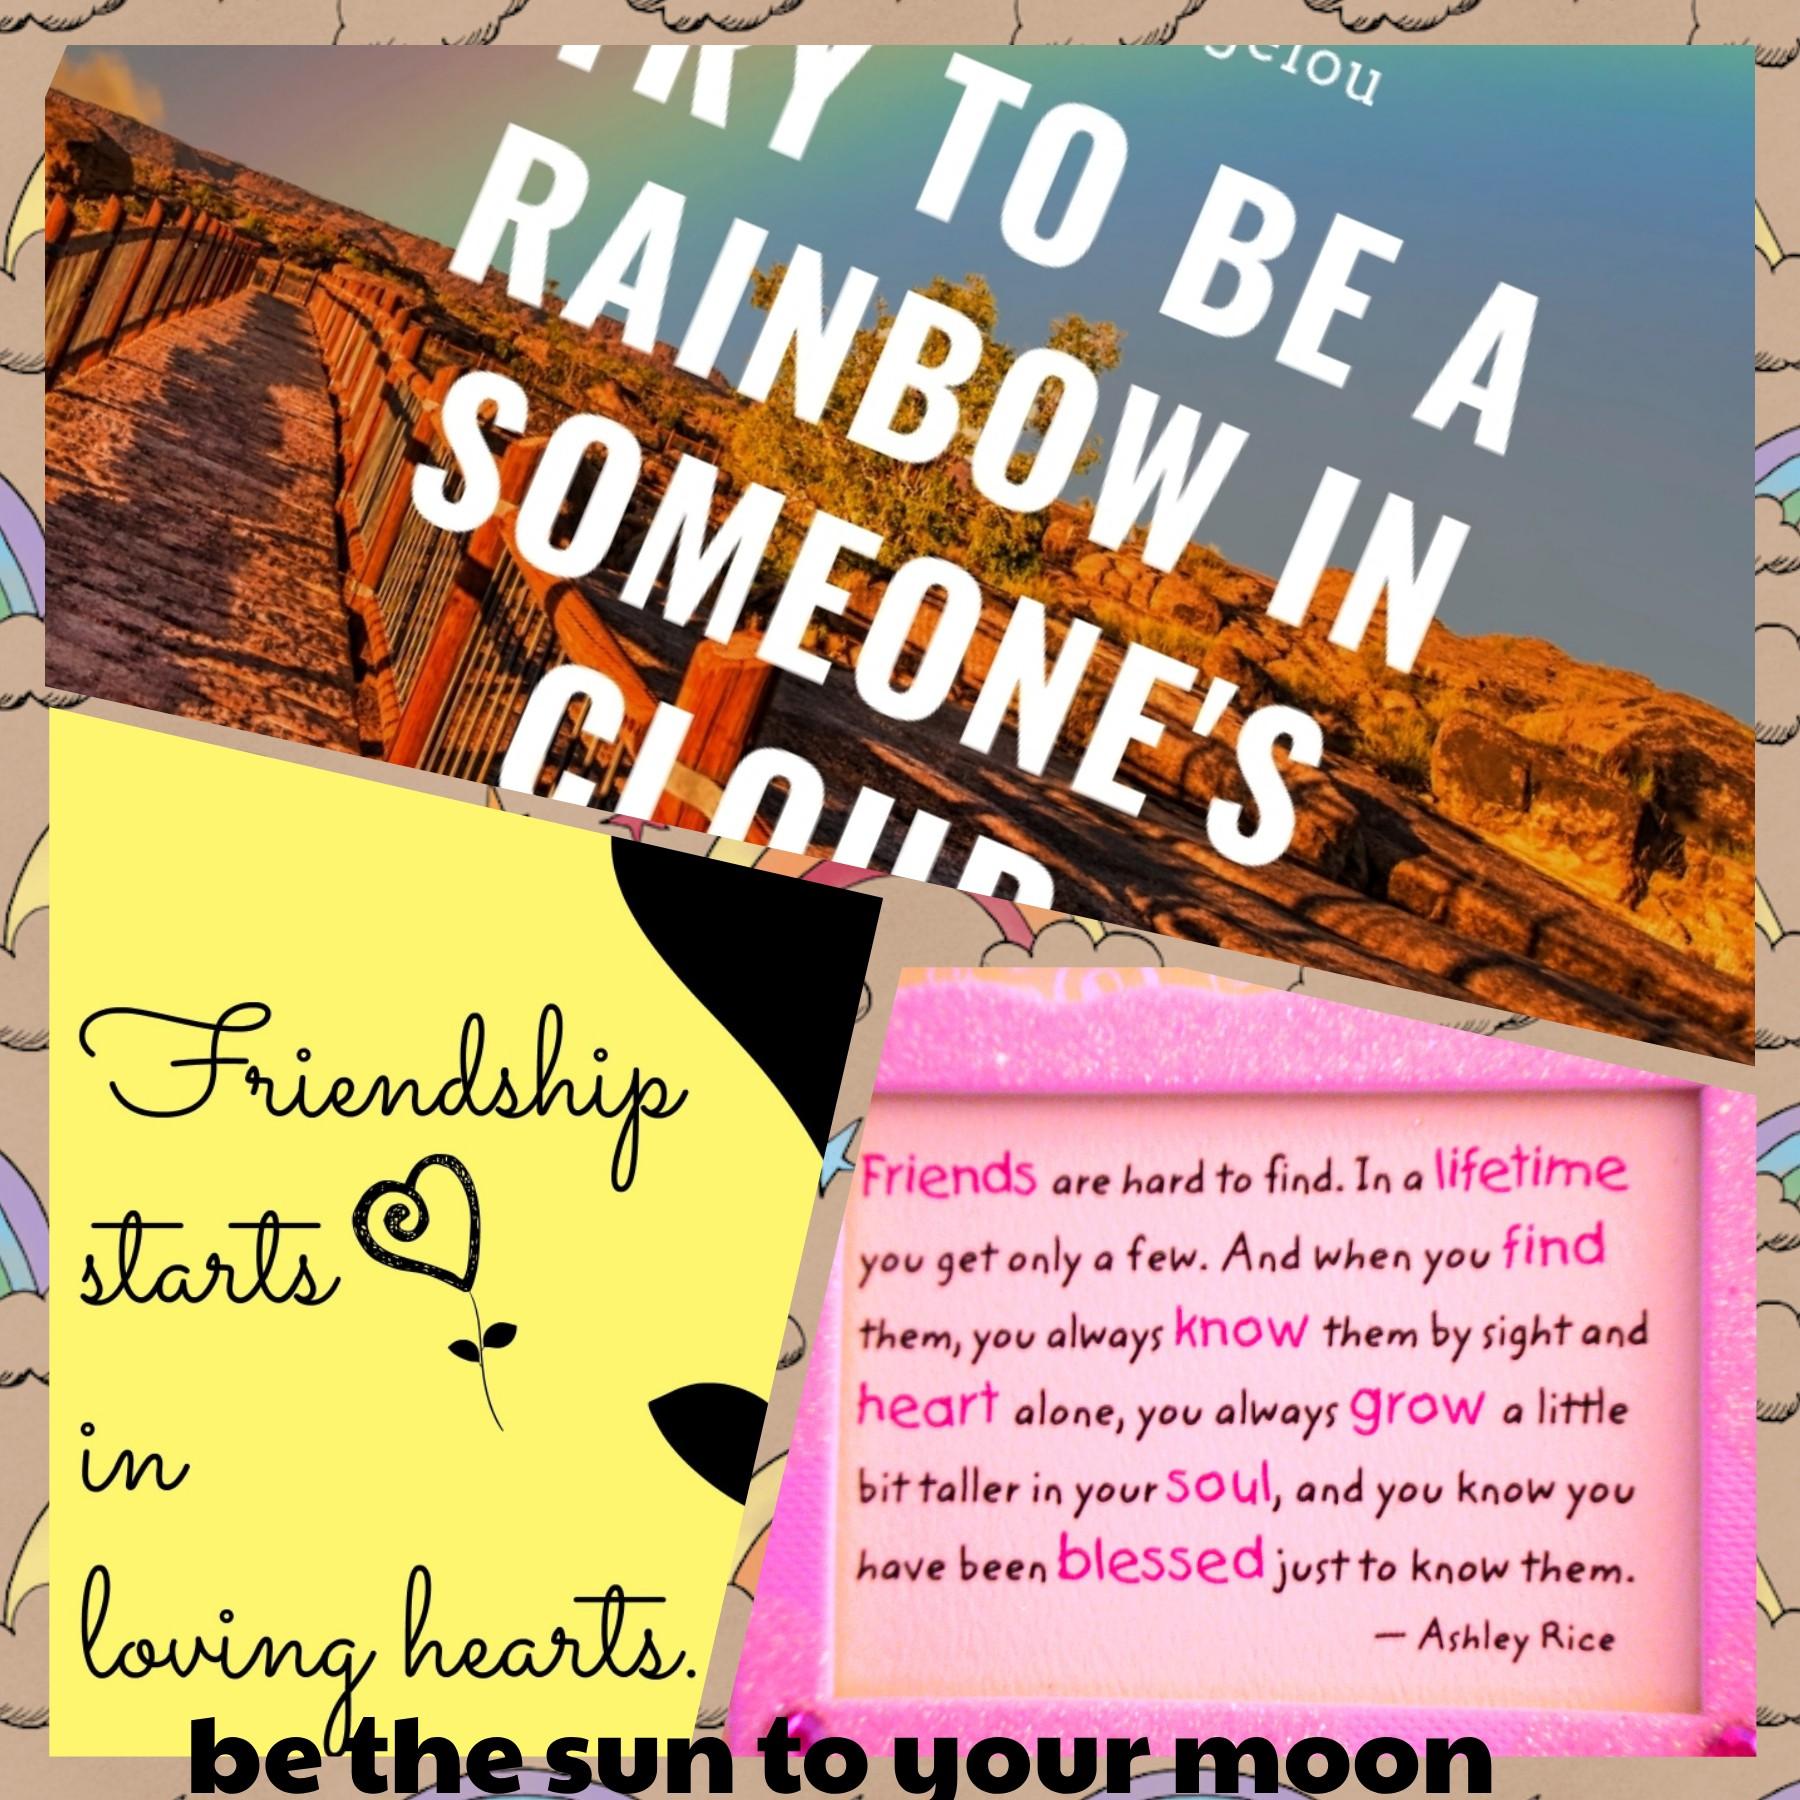 🌜tap🌛
☀️be the sun to your moon the crazy to your lazy friend lol # friendship rocks ☀️